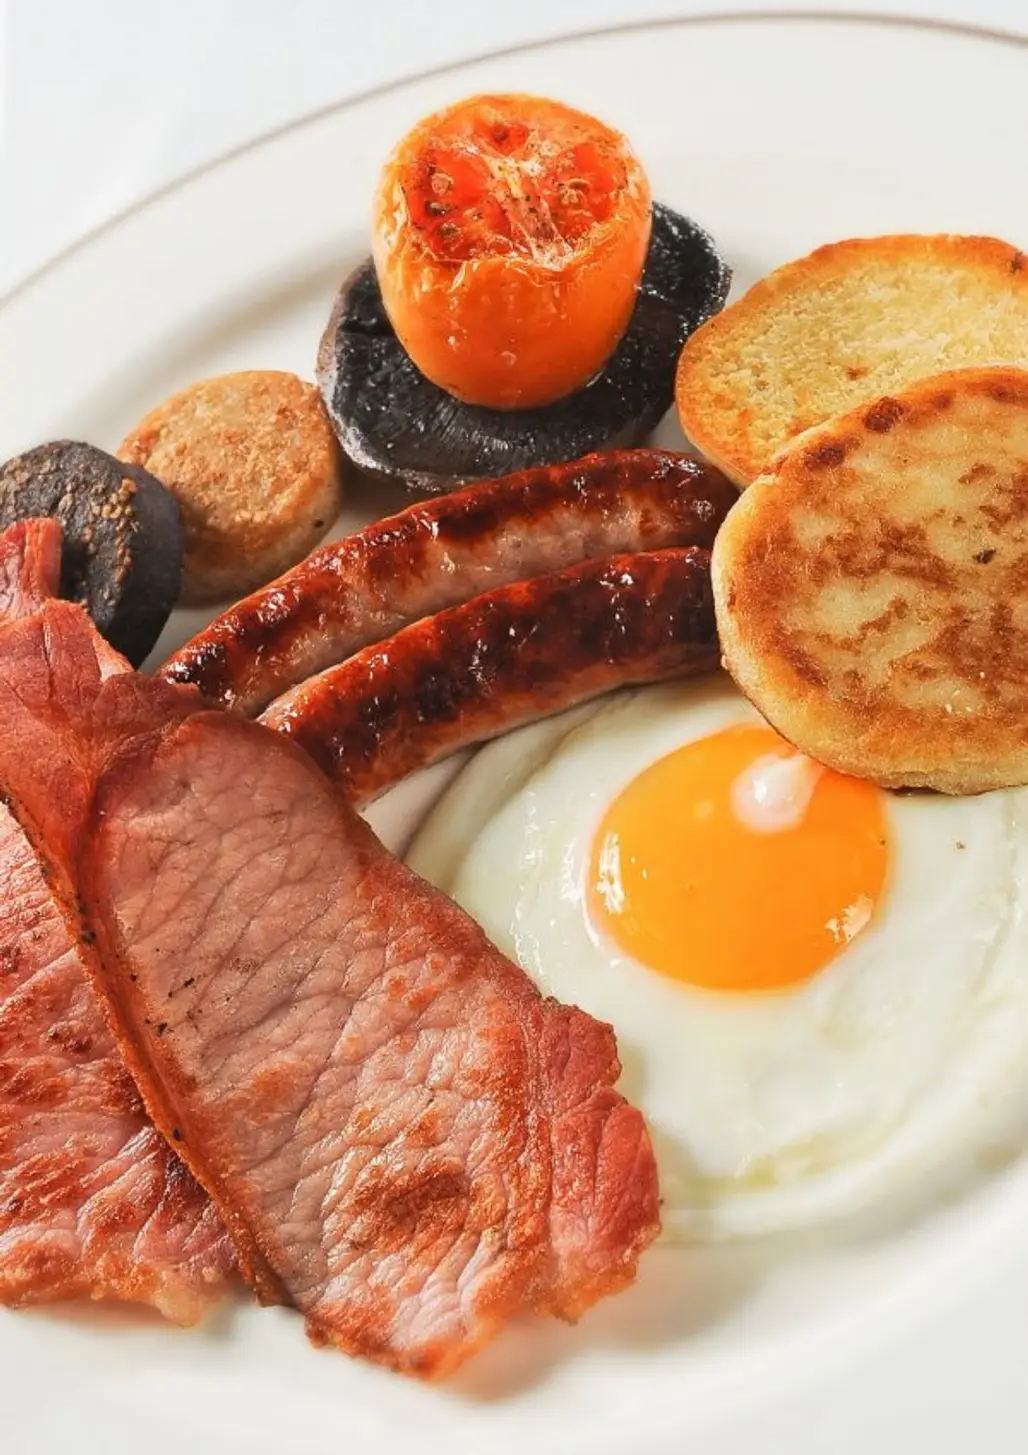 Ulster Fry-up, United Kingdom